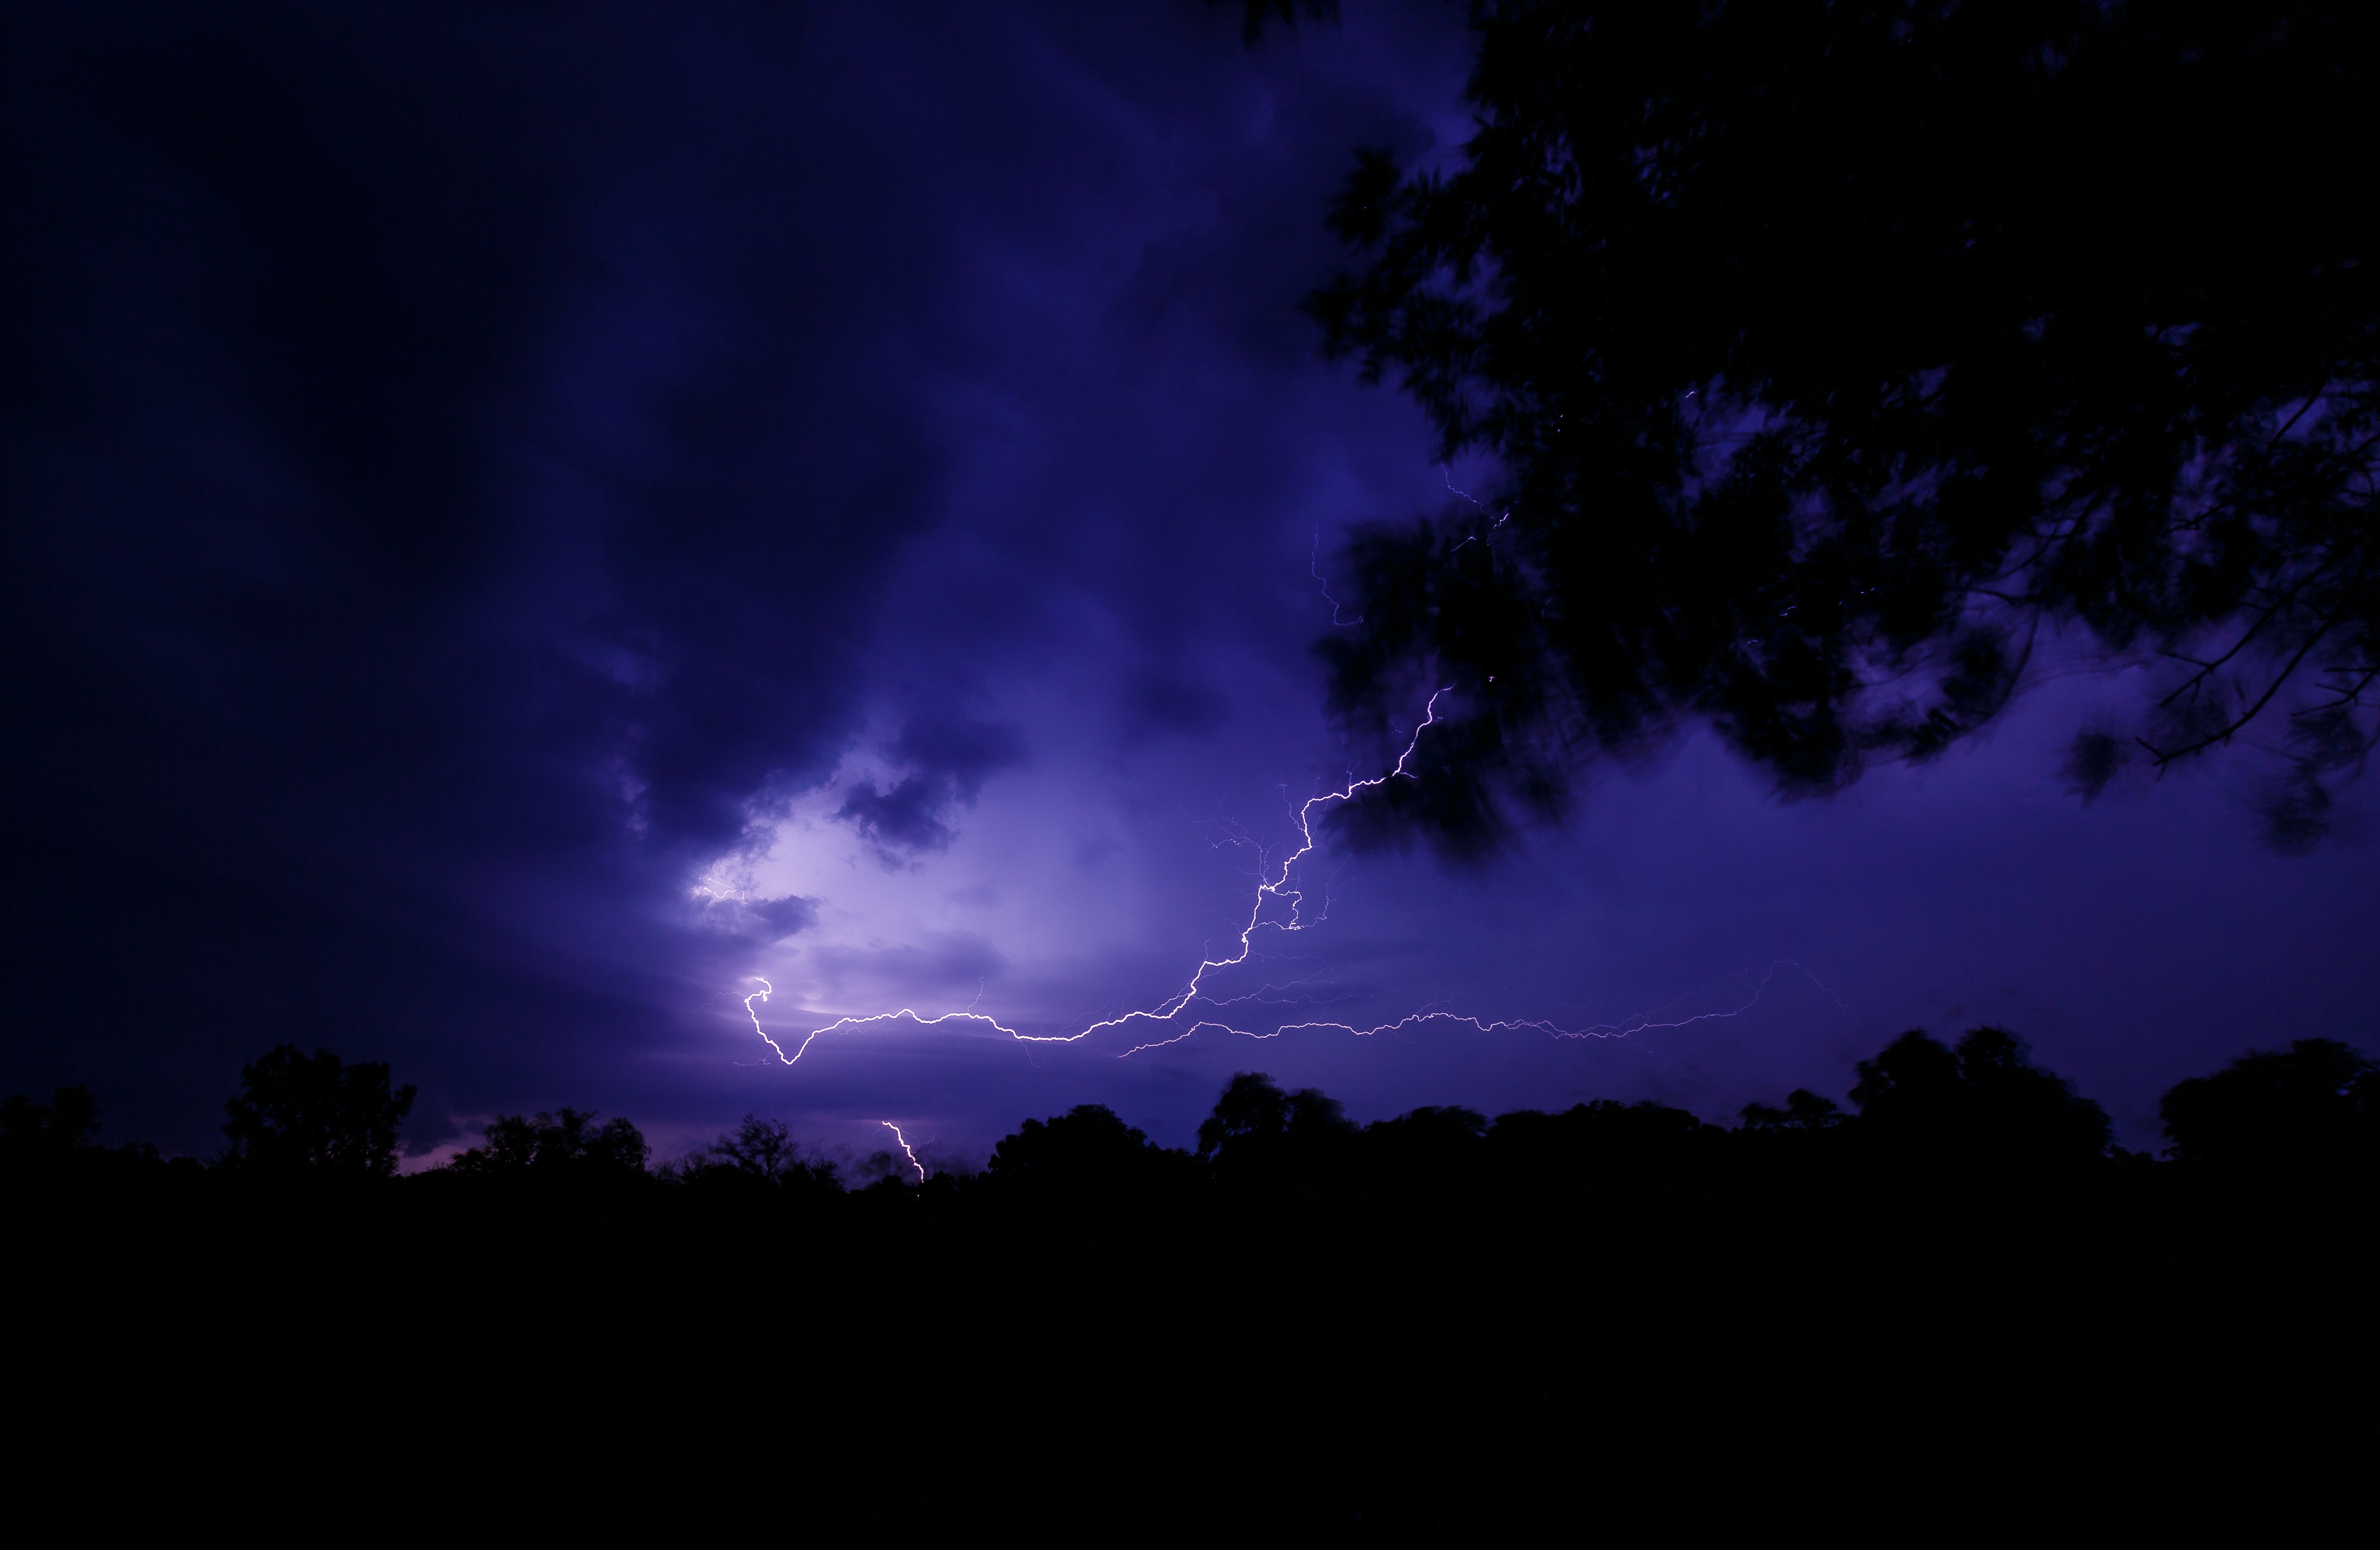 148090 download wallpaper sky, night, lightning, dark, storm, thunderstorm screensavers and pictures for free